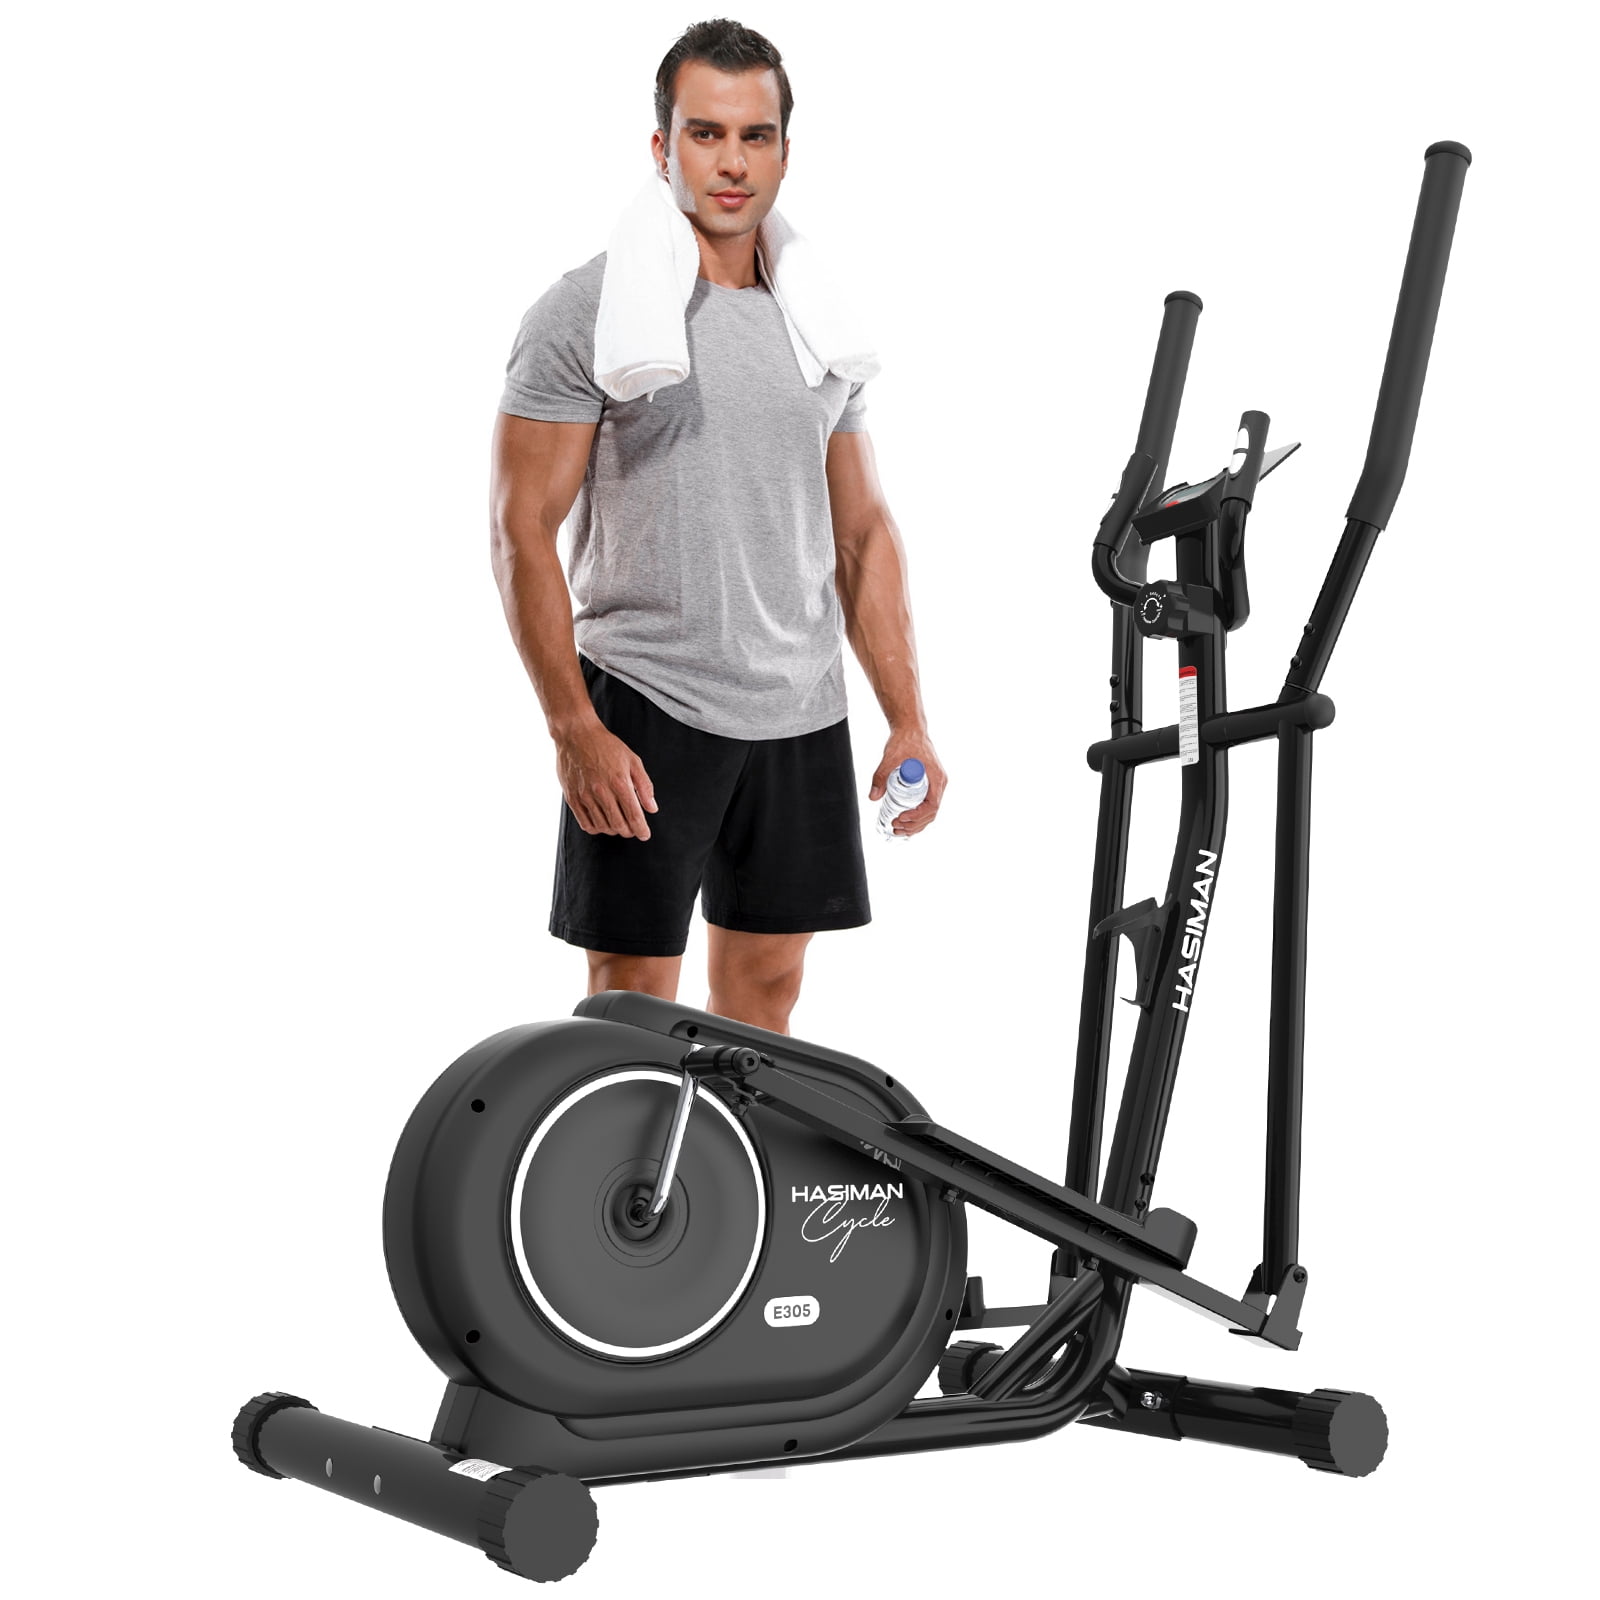 Indoor Elliptical Exercise Fitness Trainer Workout Machine Gym Cardio Equipment 